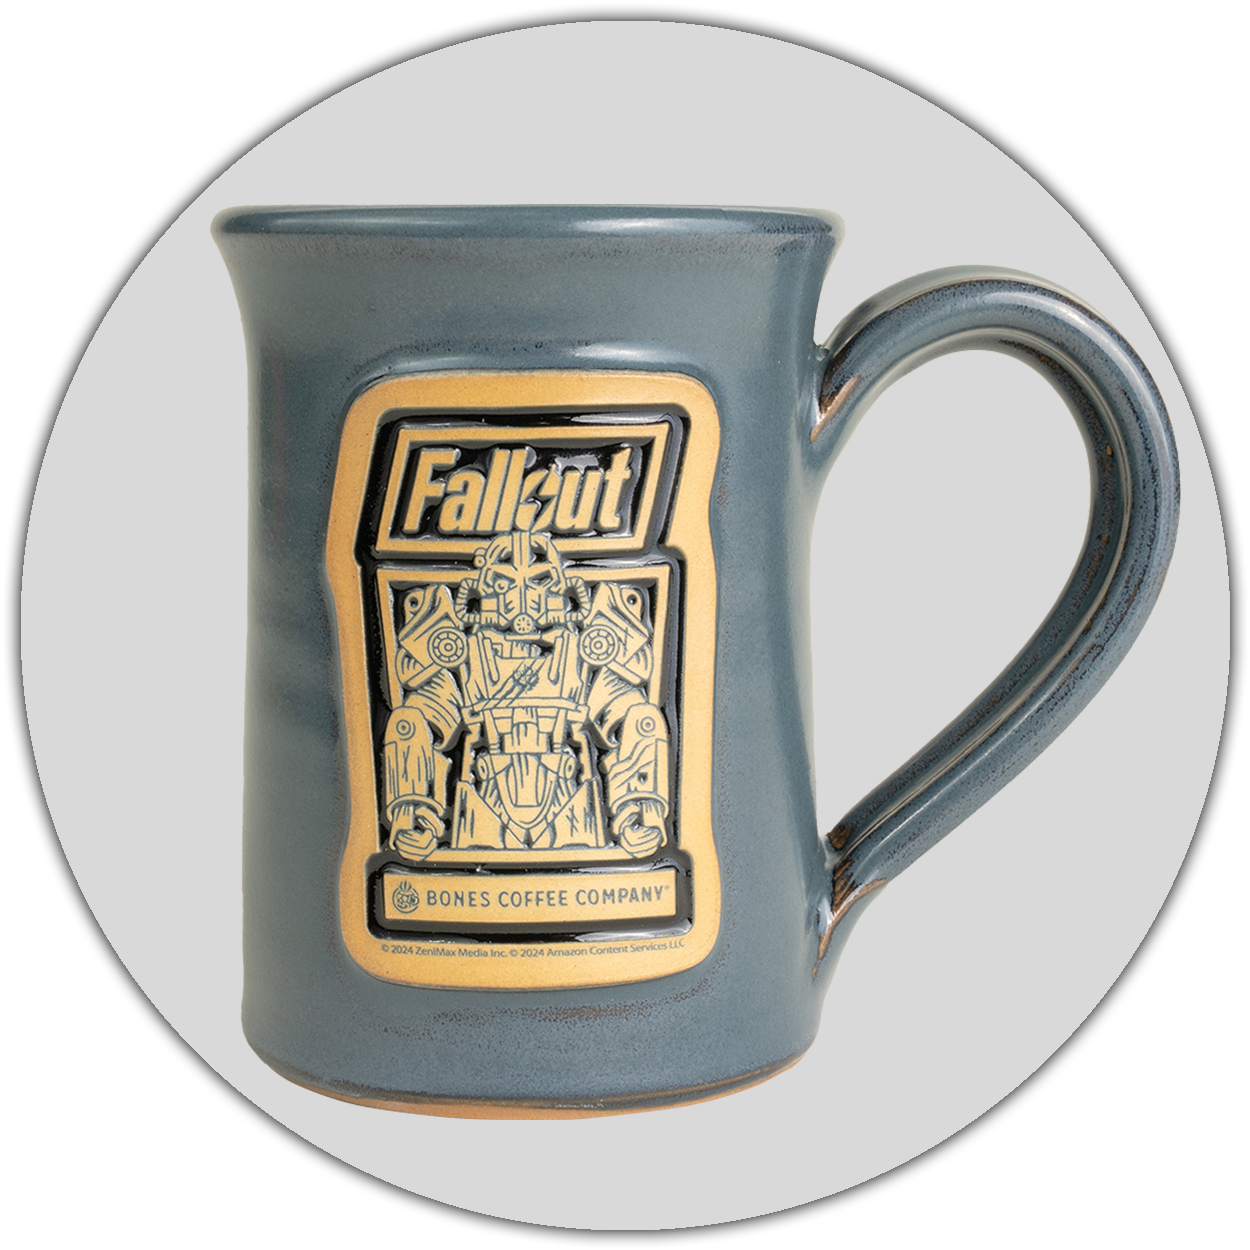 The front of the Bones Coffee Company Maximilius hand thrown mug with the Valiant Vanilla art on the golden medallion. It is inspired by Zenimax and Amazon’s Fallout show. The mug is gray colored. A light gray circle is behind it.